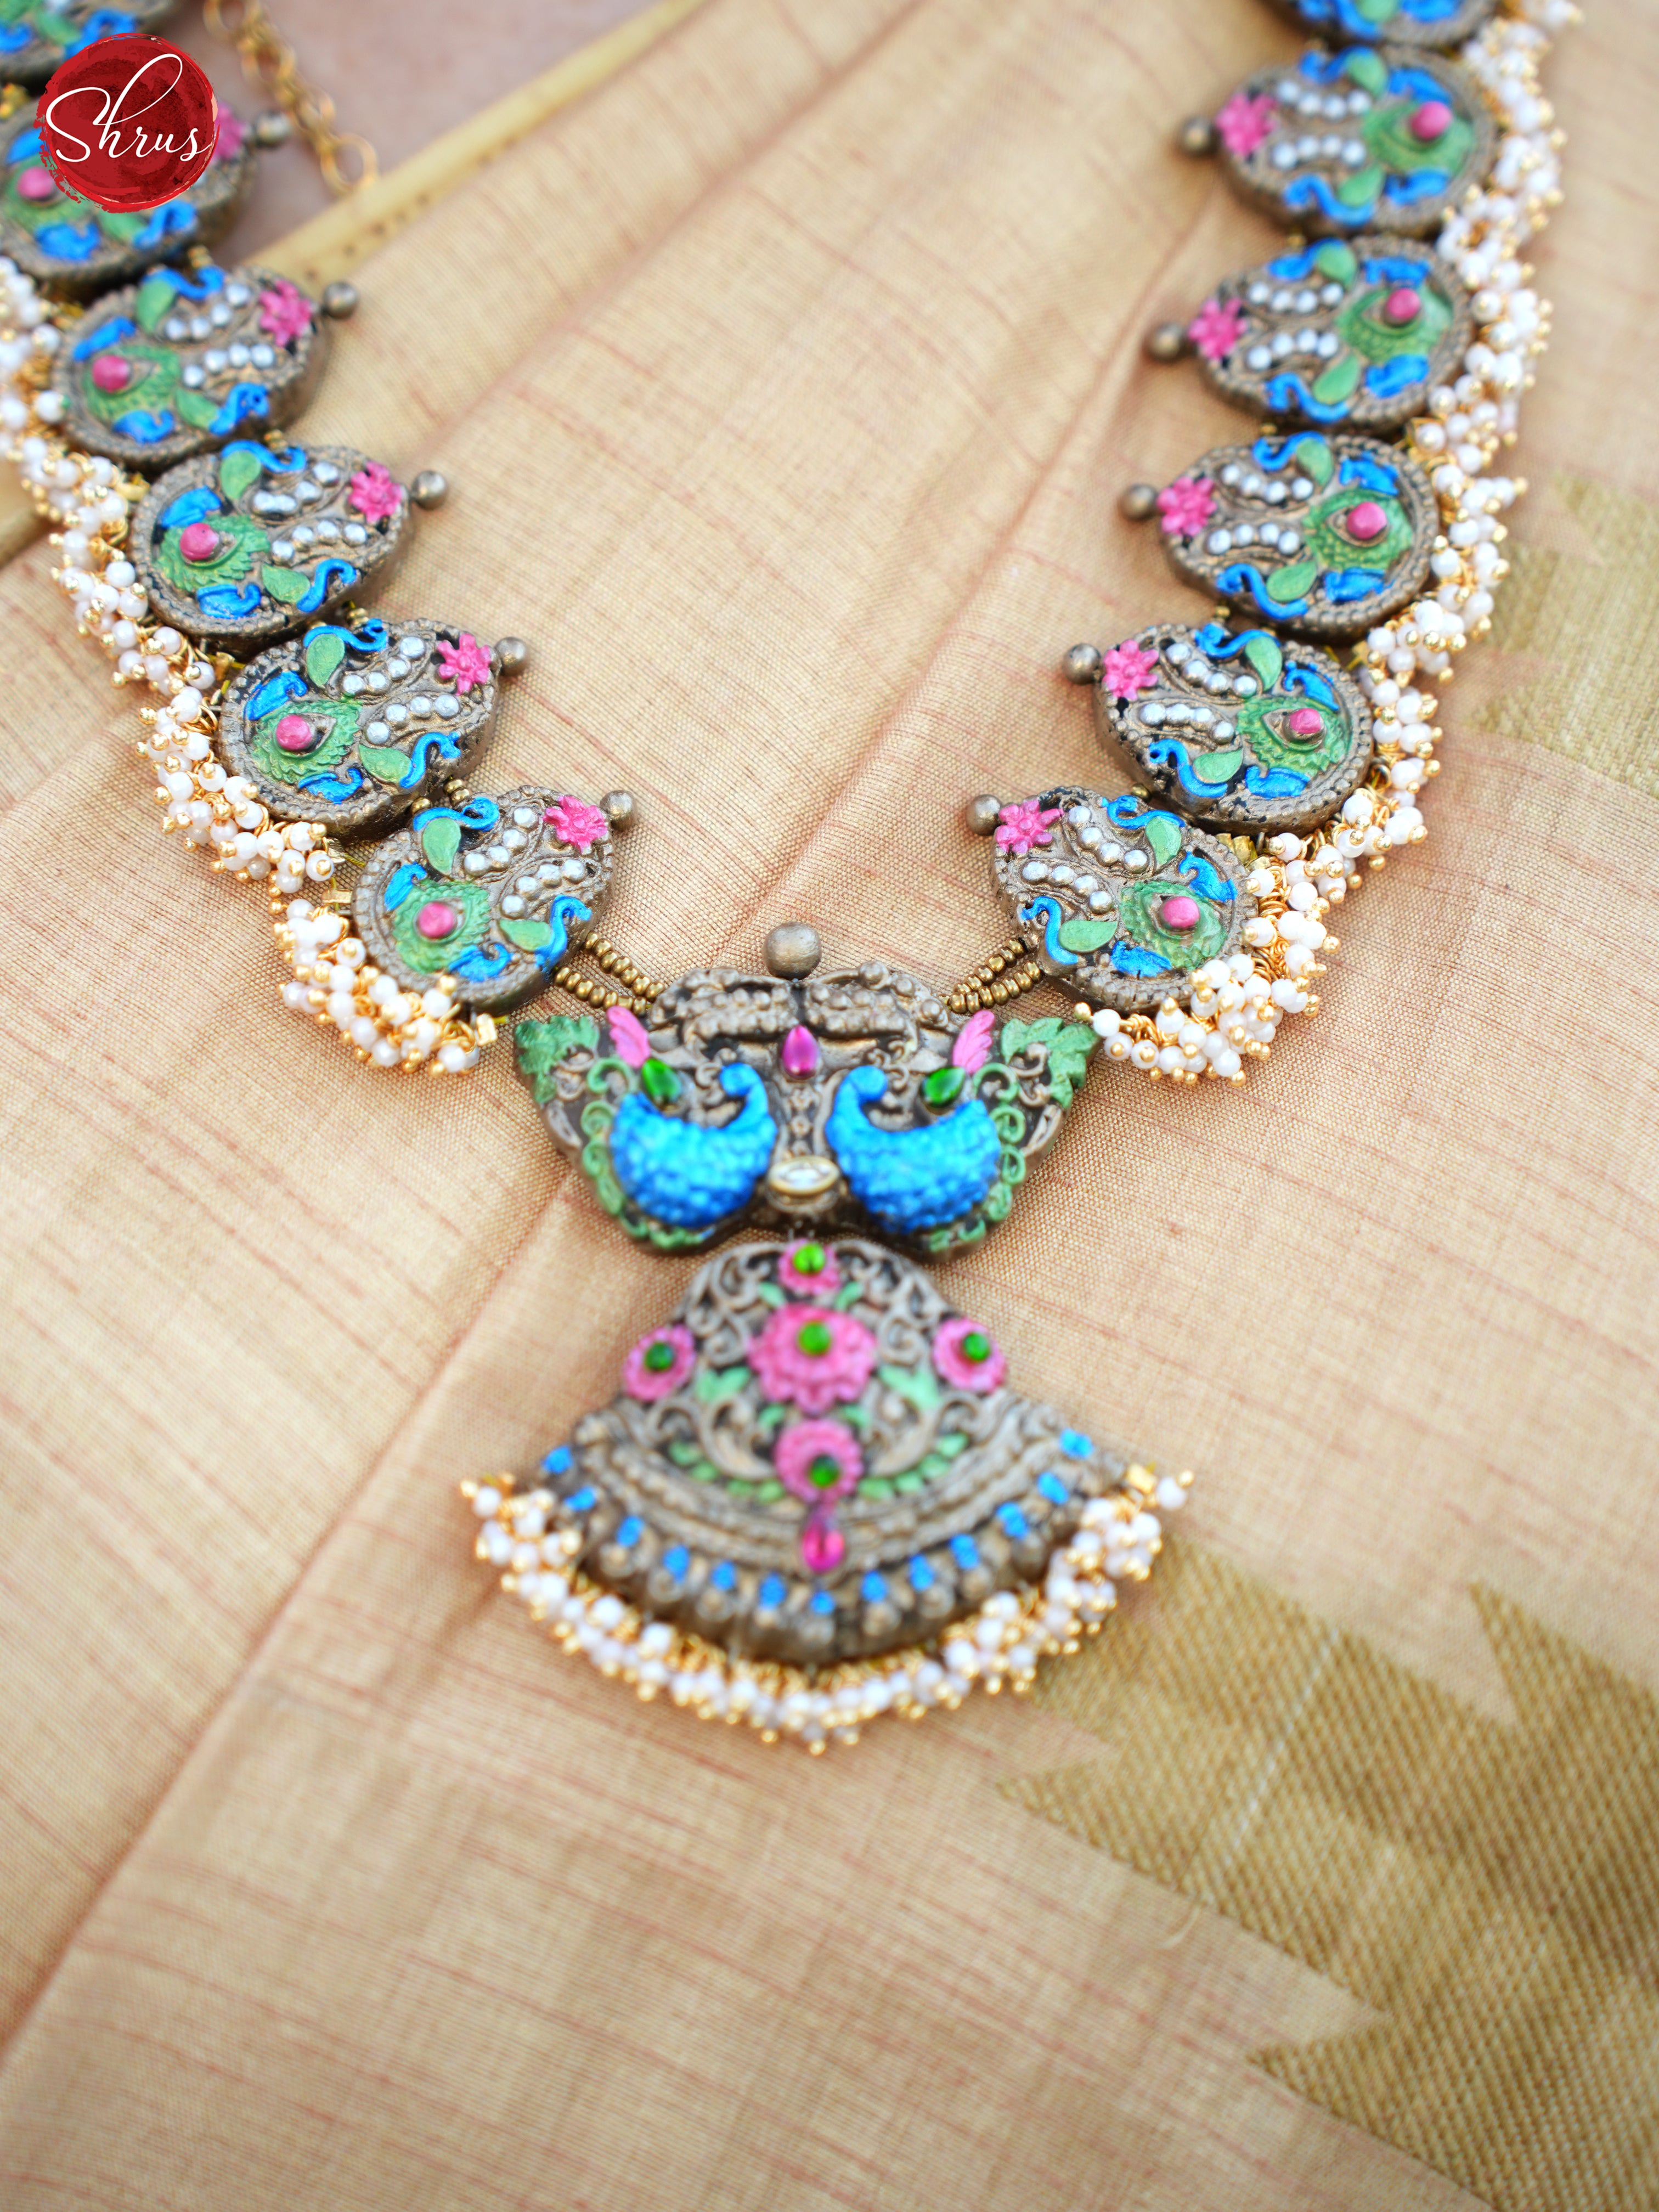 Handcrafted Peacock Terracotta  Necklace with chandbali earring  - Accessories - Shop on ShrusEternity.com